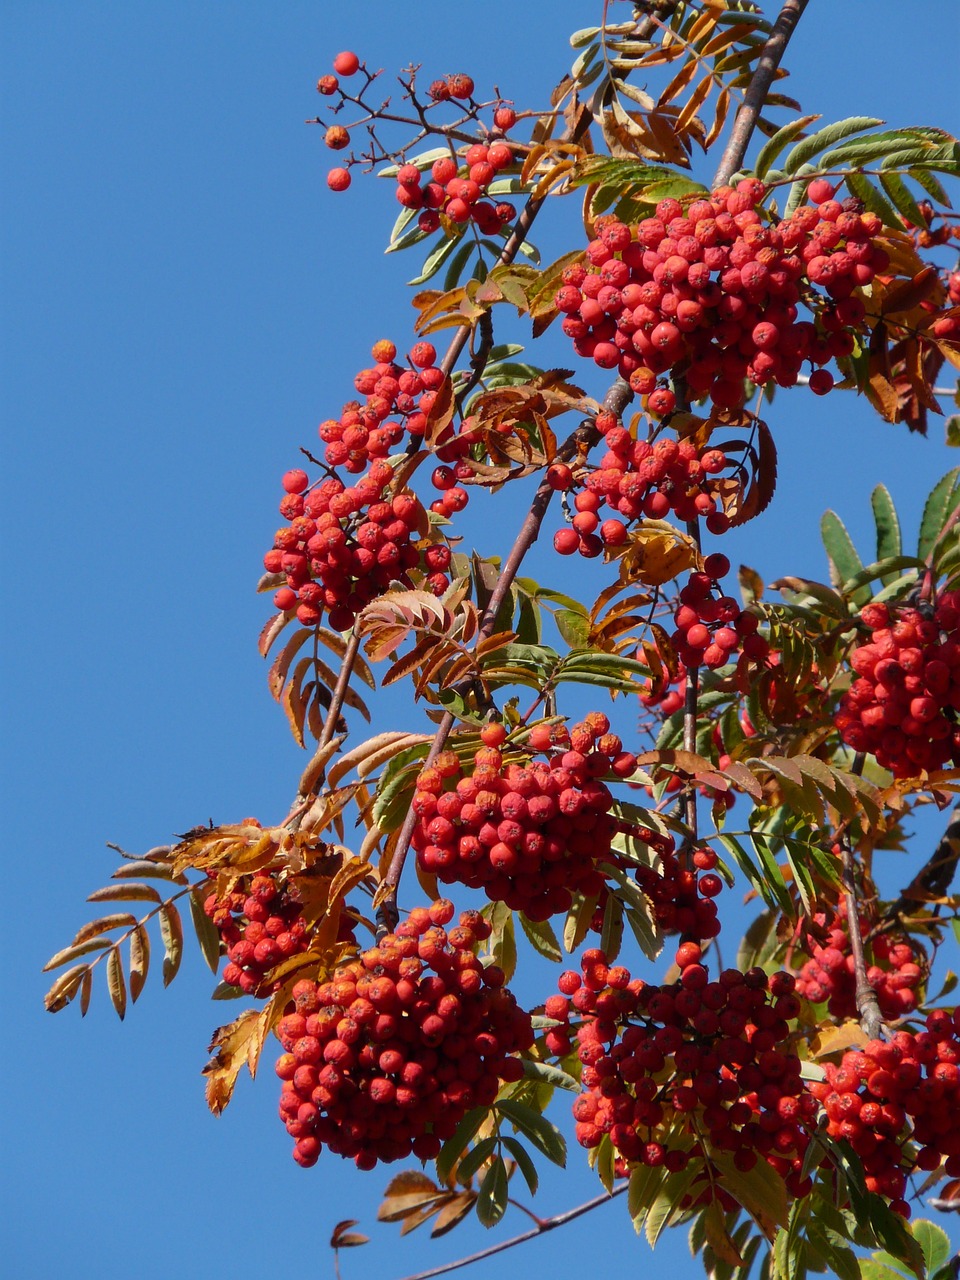 a bunch of red berries hanging from a tree, by Lorraine Fox, blue sky, adult, pyromallis, red colors